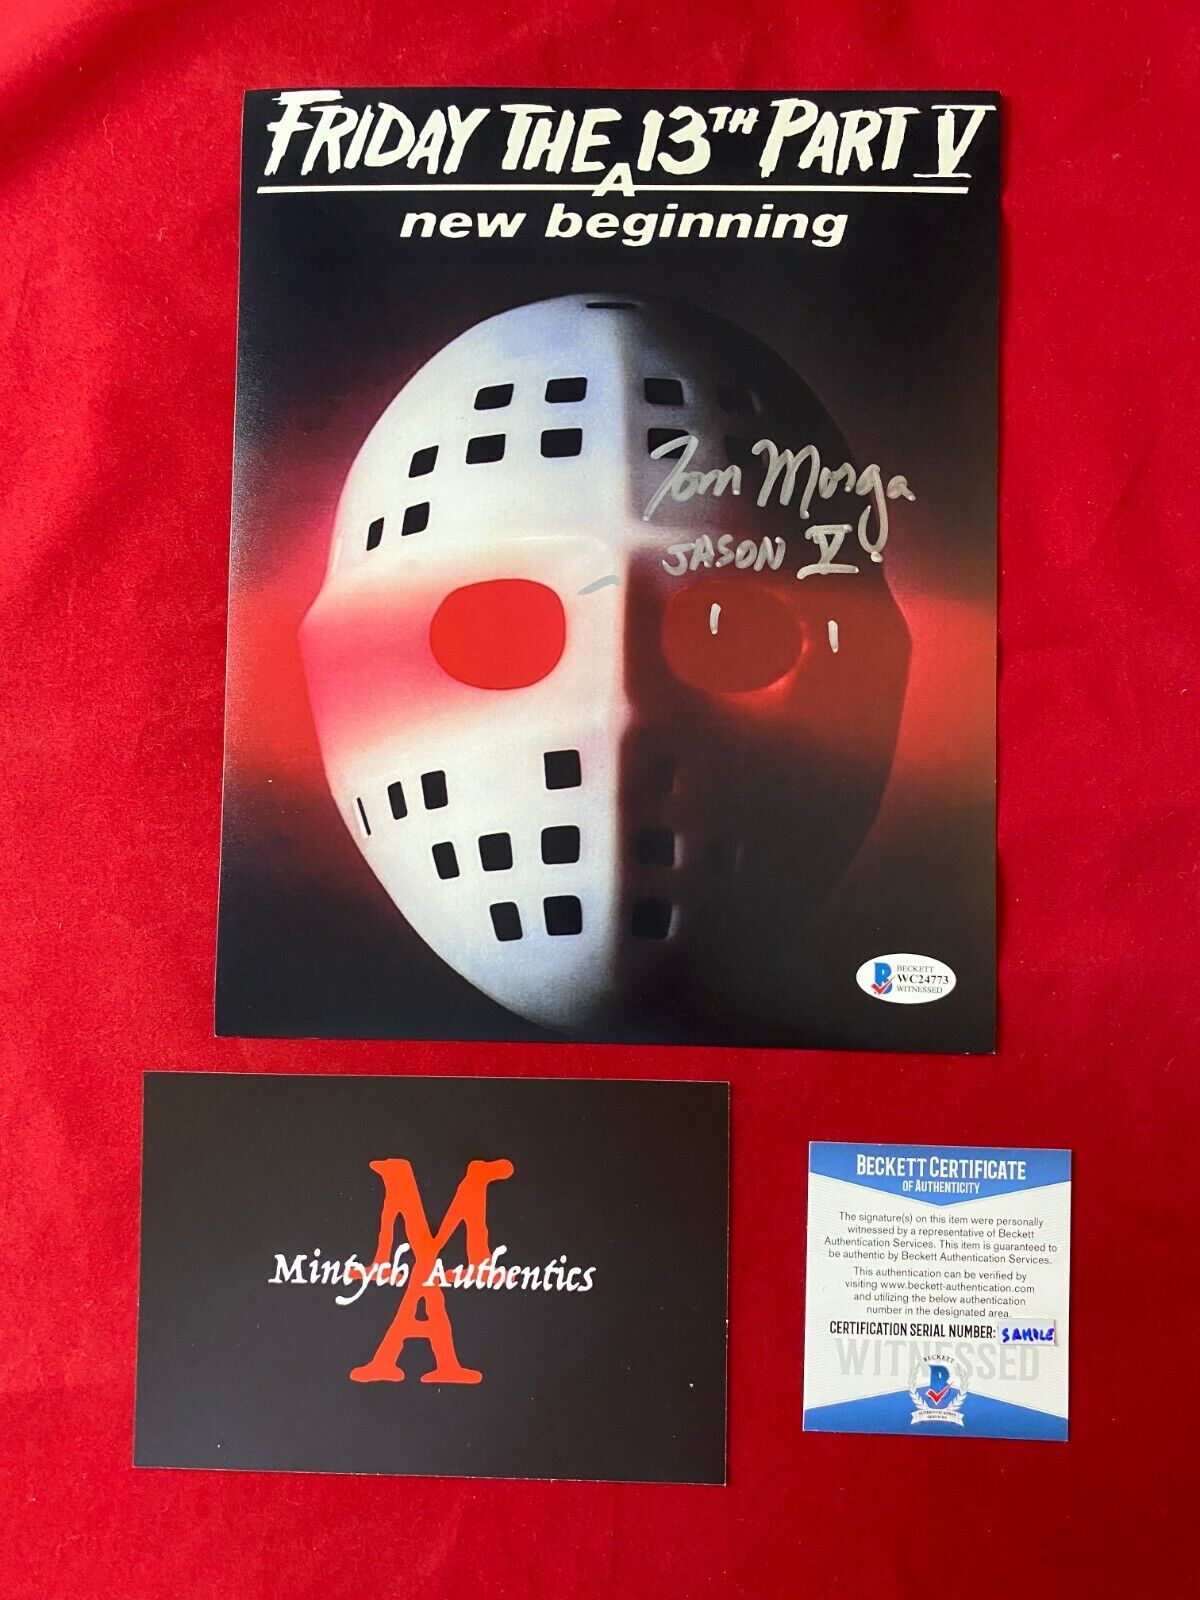 TOM MORGA AUTOGRAPHED SIGNED 8x10 Photo Poster painting! FRIDAY THE 13TH! JASON VOORHEES BECKETT